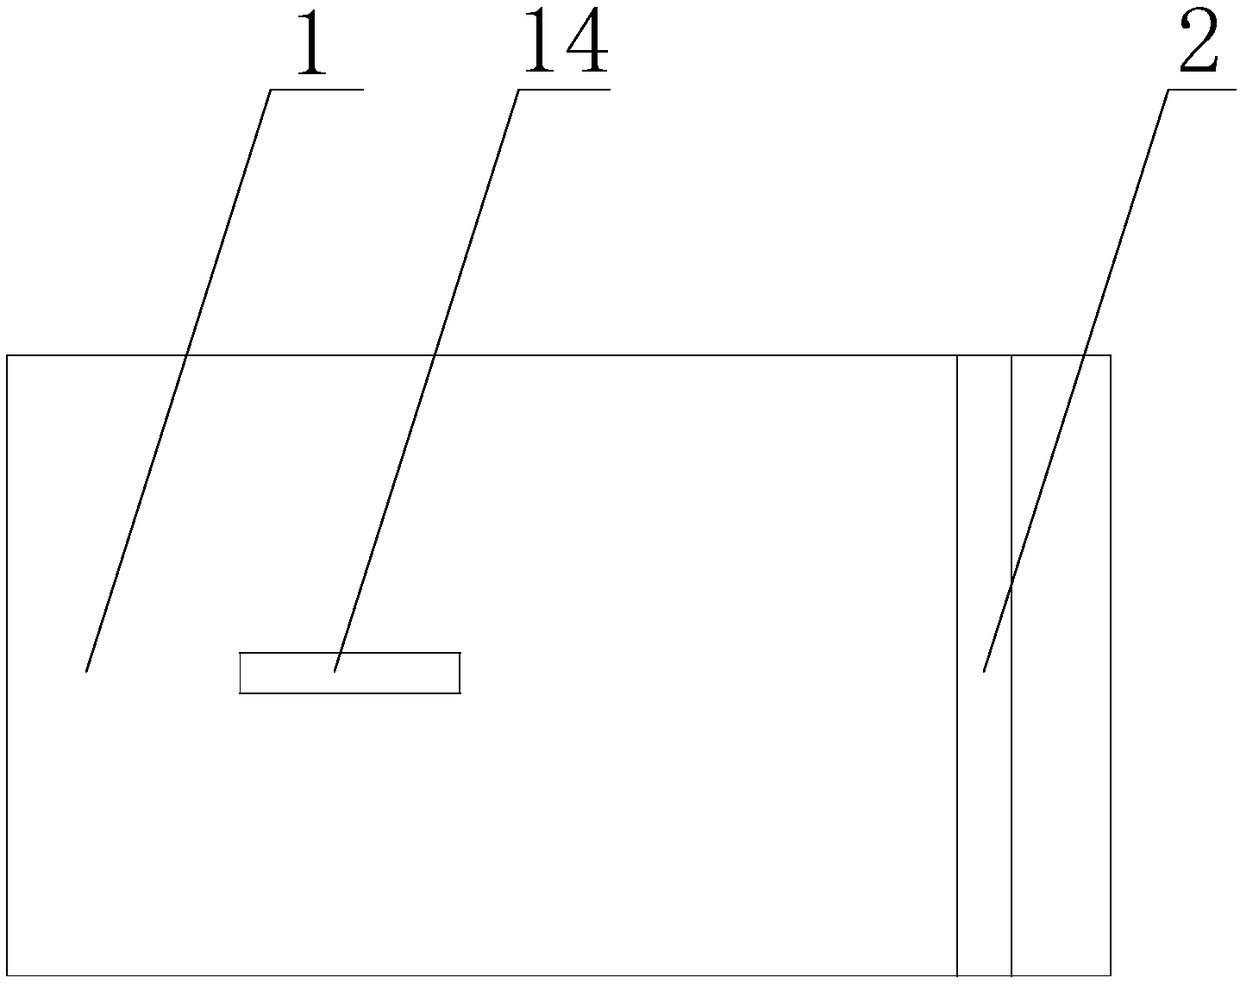 Realization method based on the bending of steel bars with different diameters